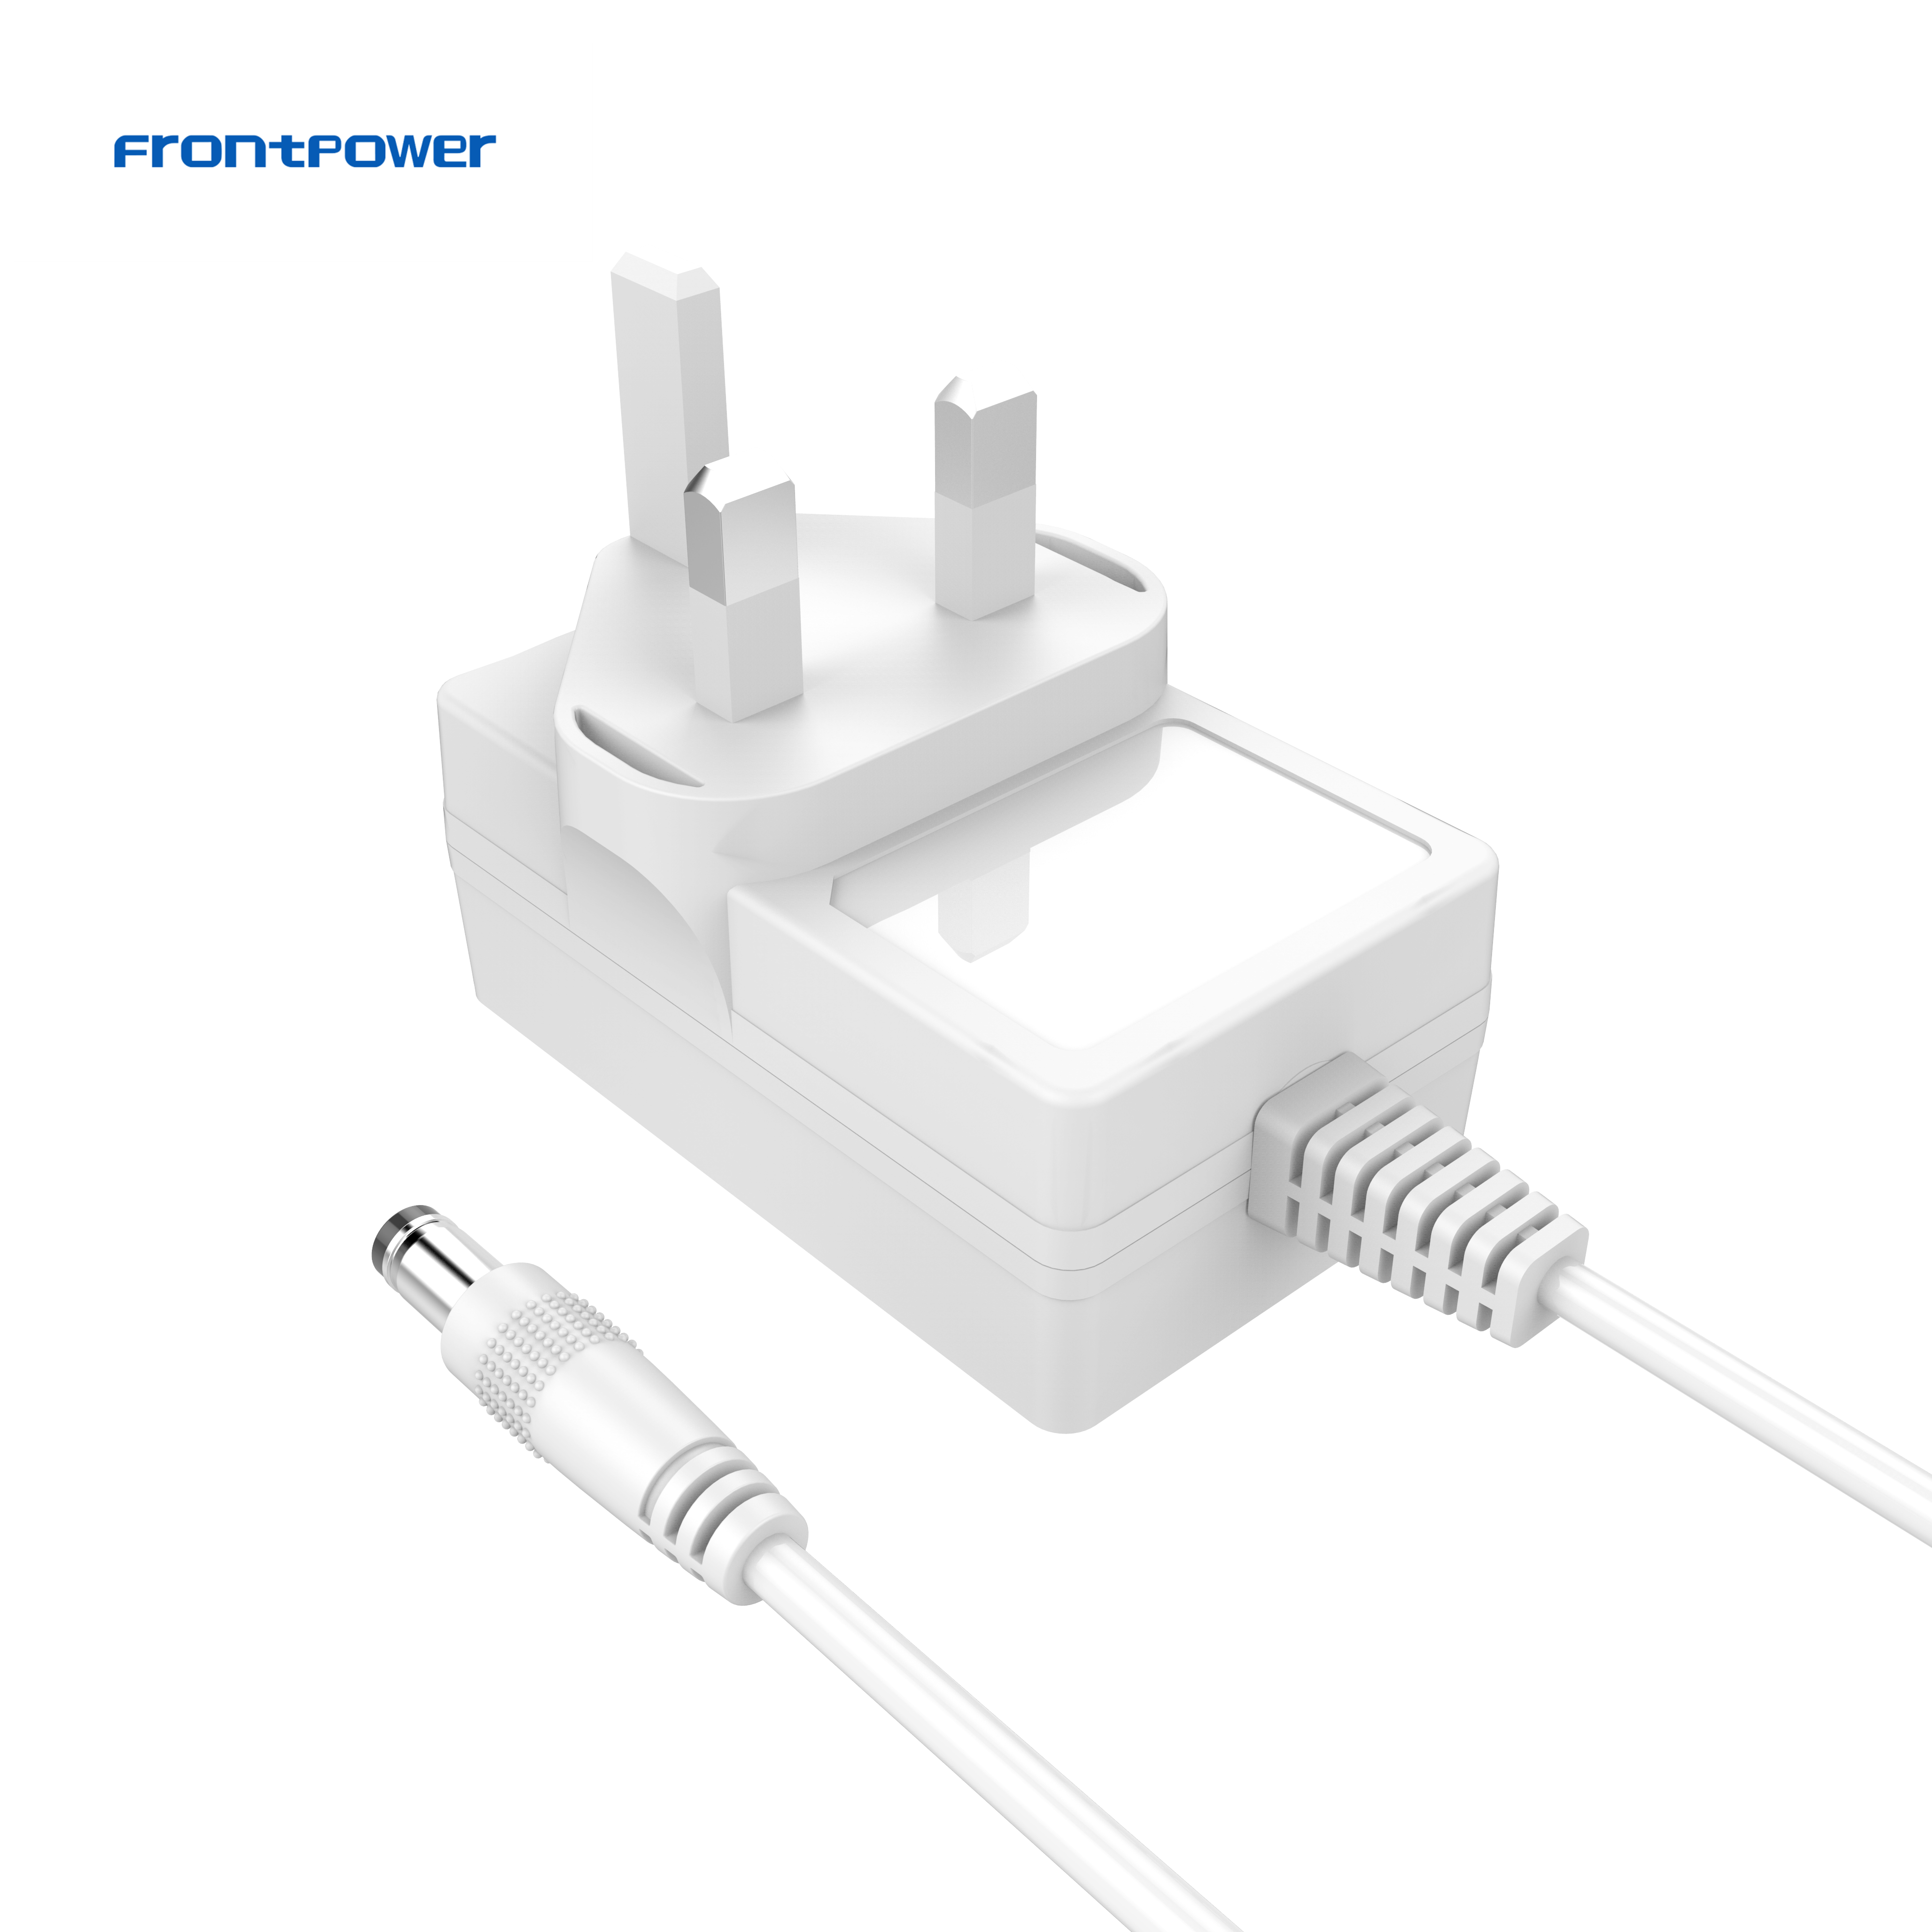 Frontpower wall plug power adaptor 5V 3A 3.5A 24V1A 24W 12V 2A adapter with UL CE GS FCC CB LVD EMC KC PSE CCC certs